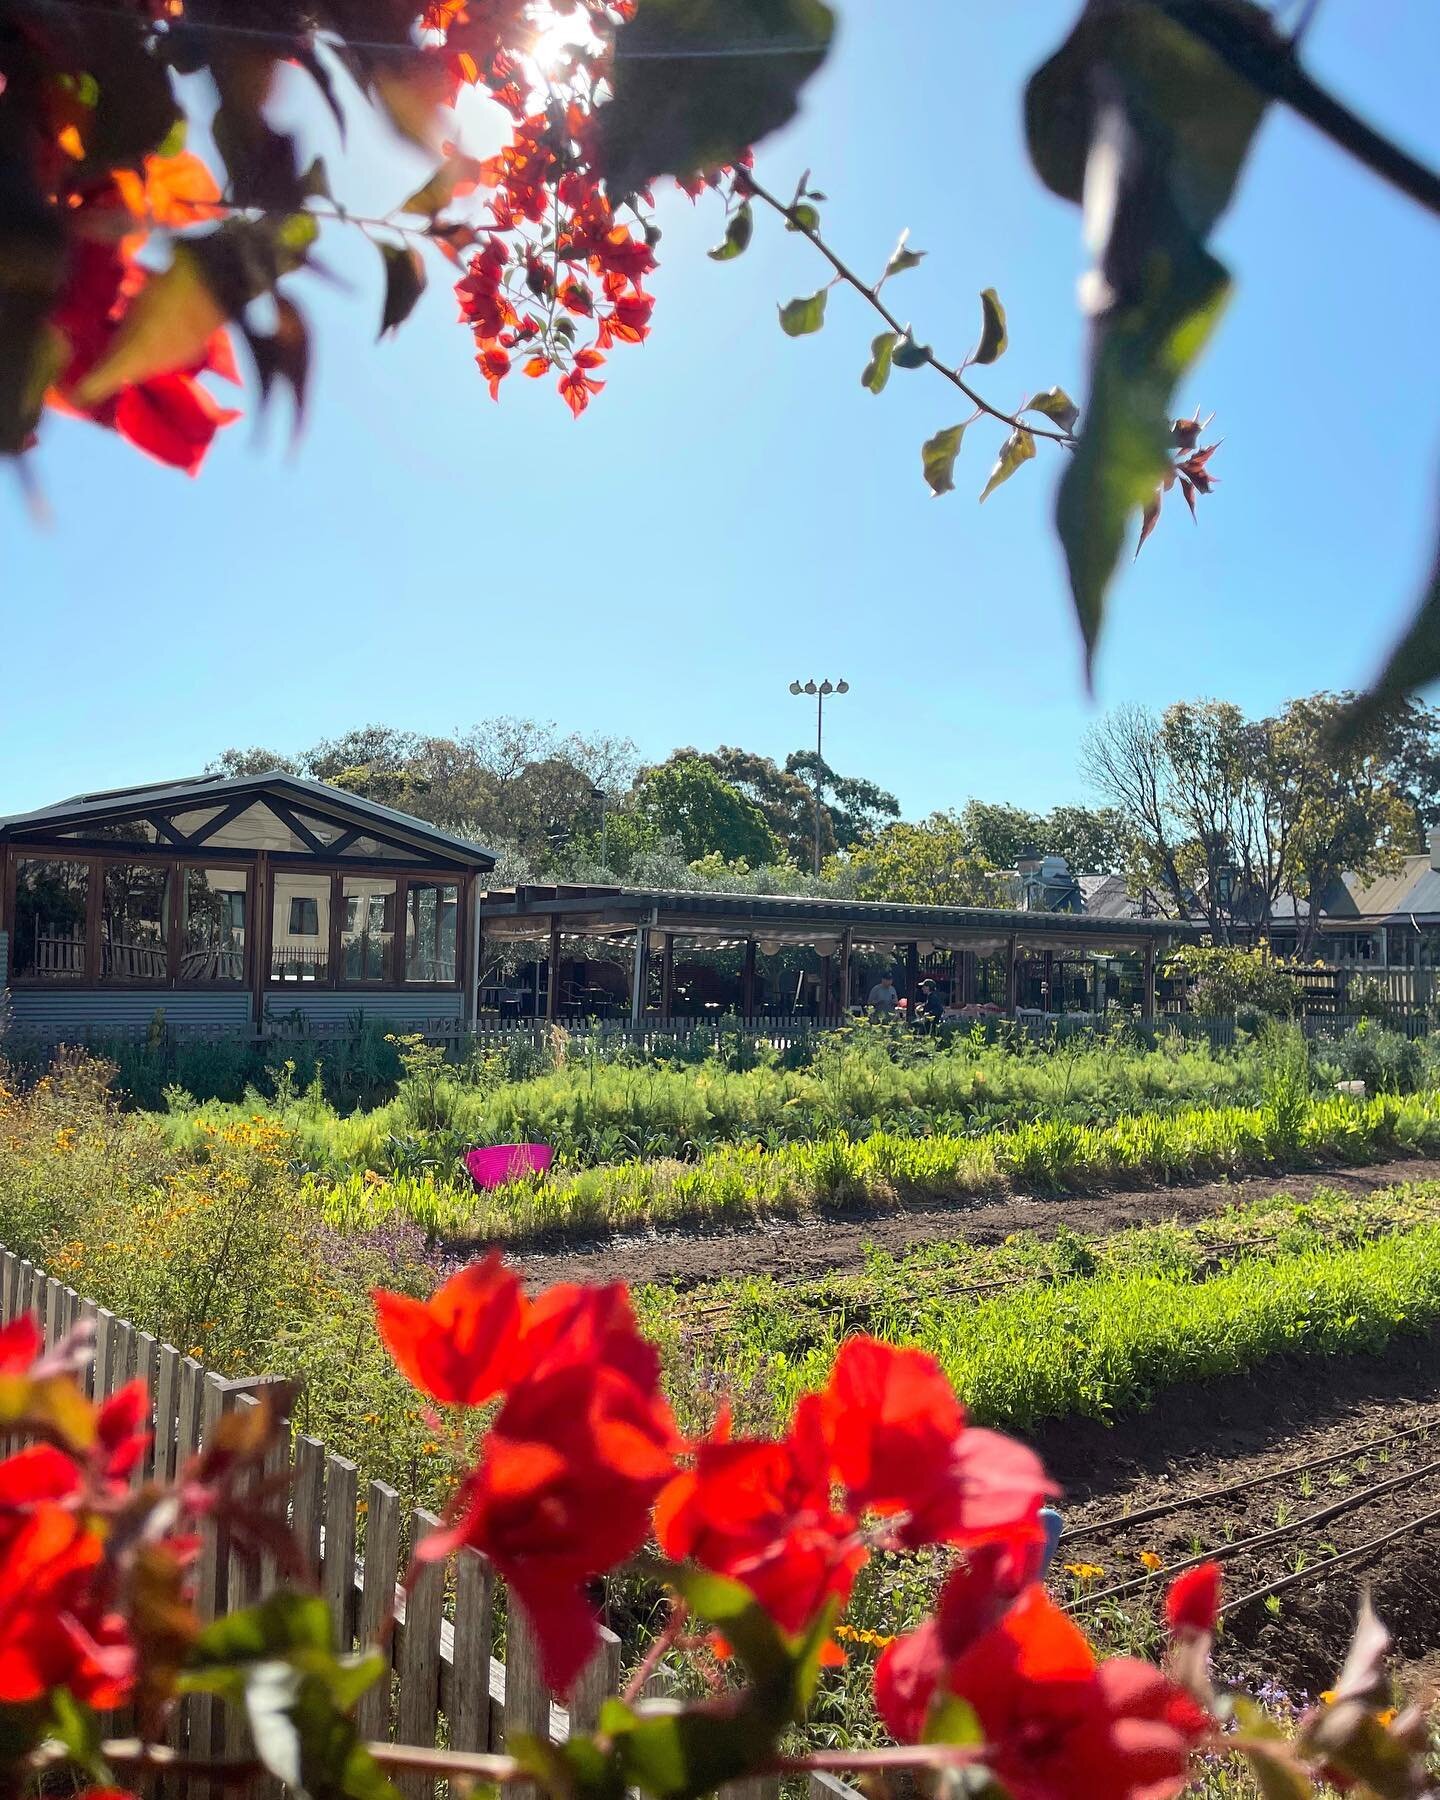 Imagine having a breakky or lunch view like this everyday 😍

Surrounded by lush greenery @pocketcityfarms . 
Fresh from the soil into your food and beverages! 🥘🍹